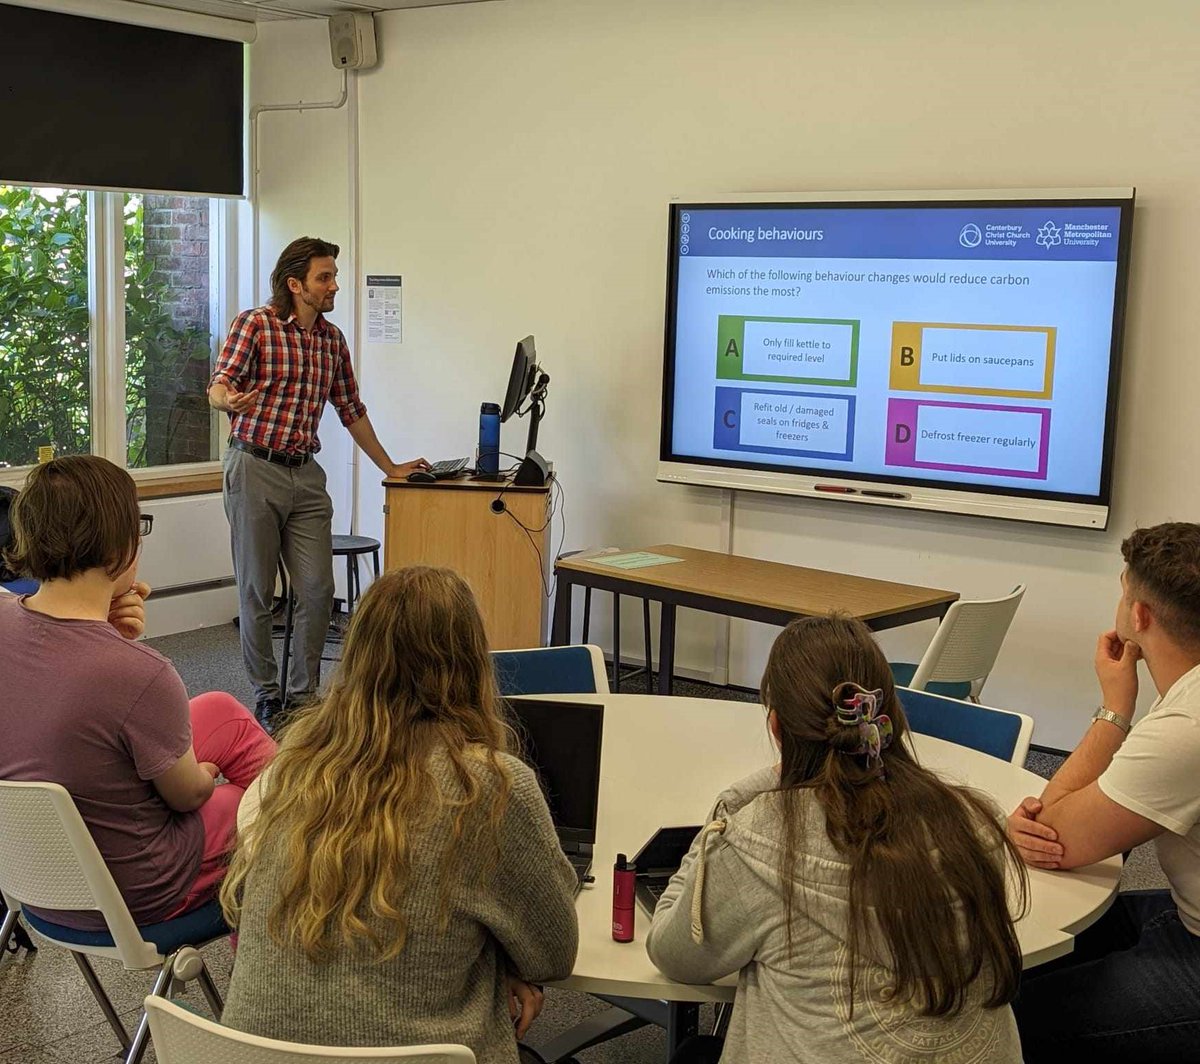 A few photos from our most recent round of Carbon Literacy Training! If you're interested in taking the course with your friends or in a degree module, contact carbonliteracytraining@canterbury.ac.uk to get the ball rolling! #clt #carbonliteracytraining #cccu